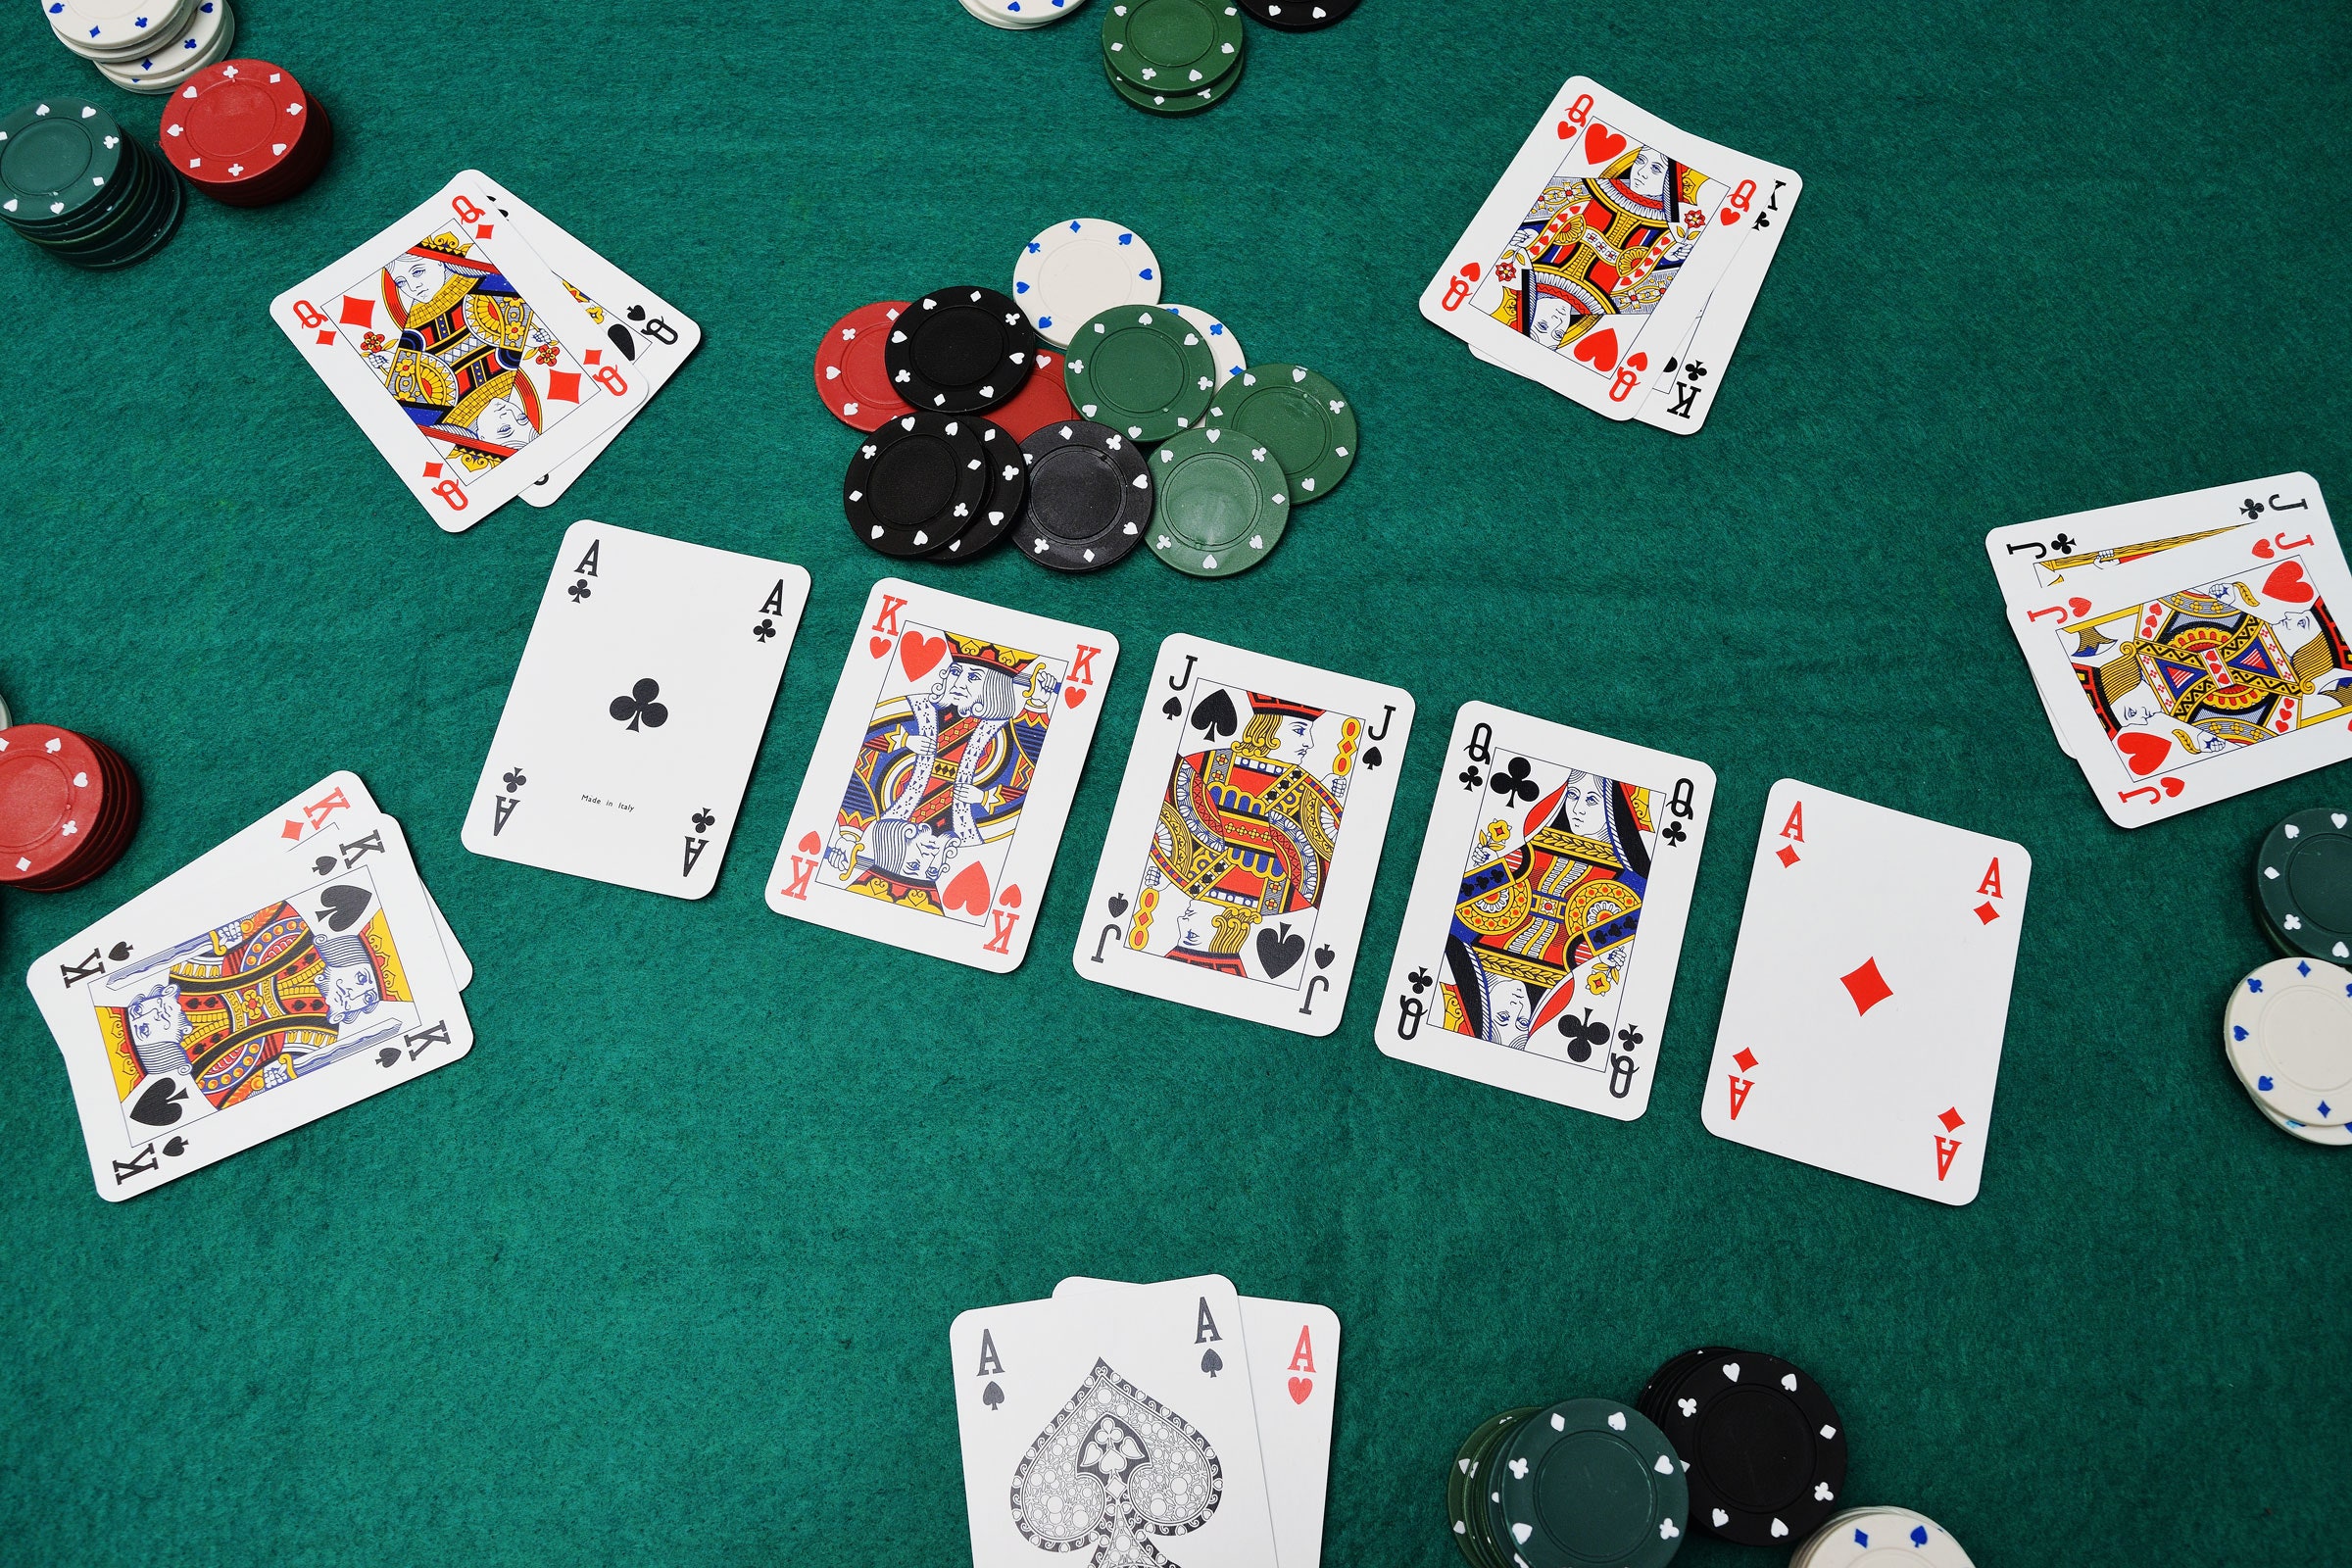 Illustrative Showing You how to Play in an Online Poker Game